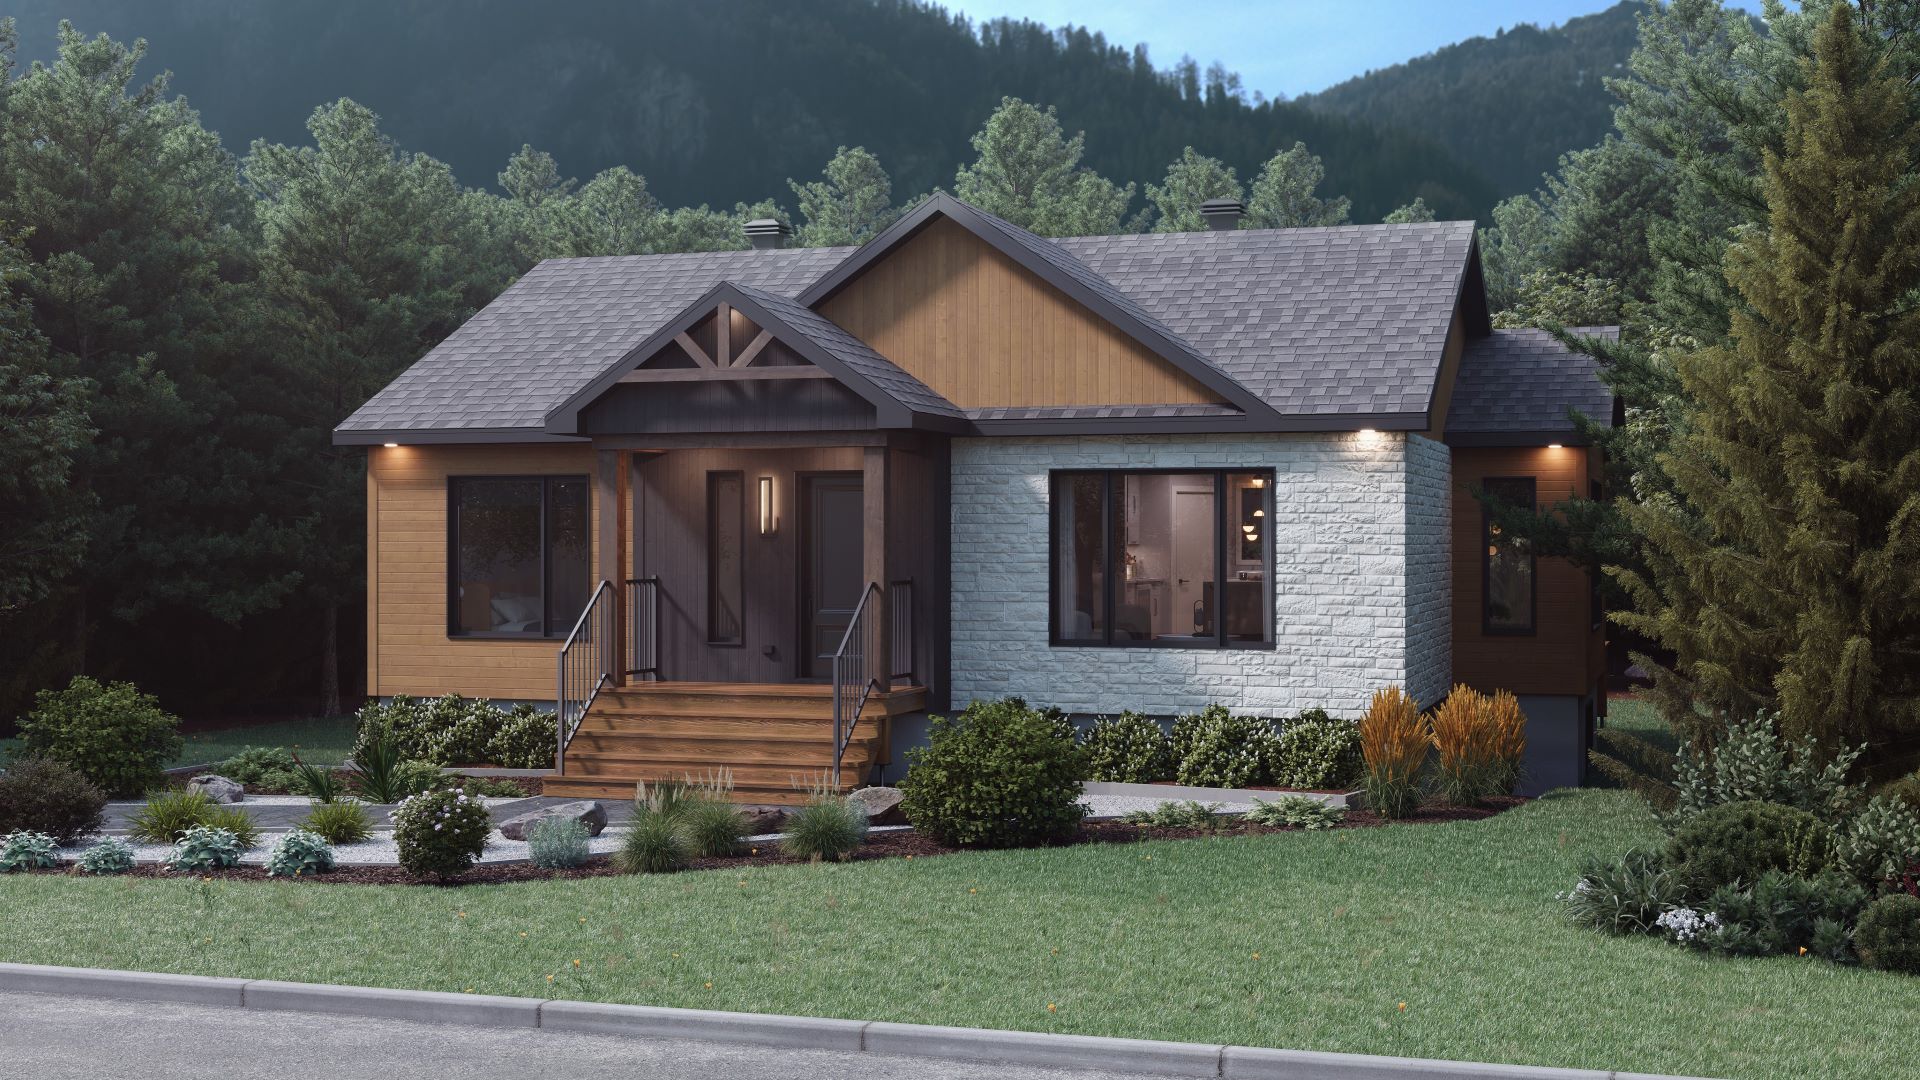 Prefabricated house of the Lata model in classic contemporary style. Front exterior view.